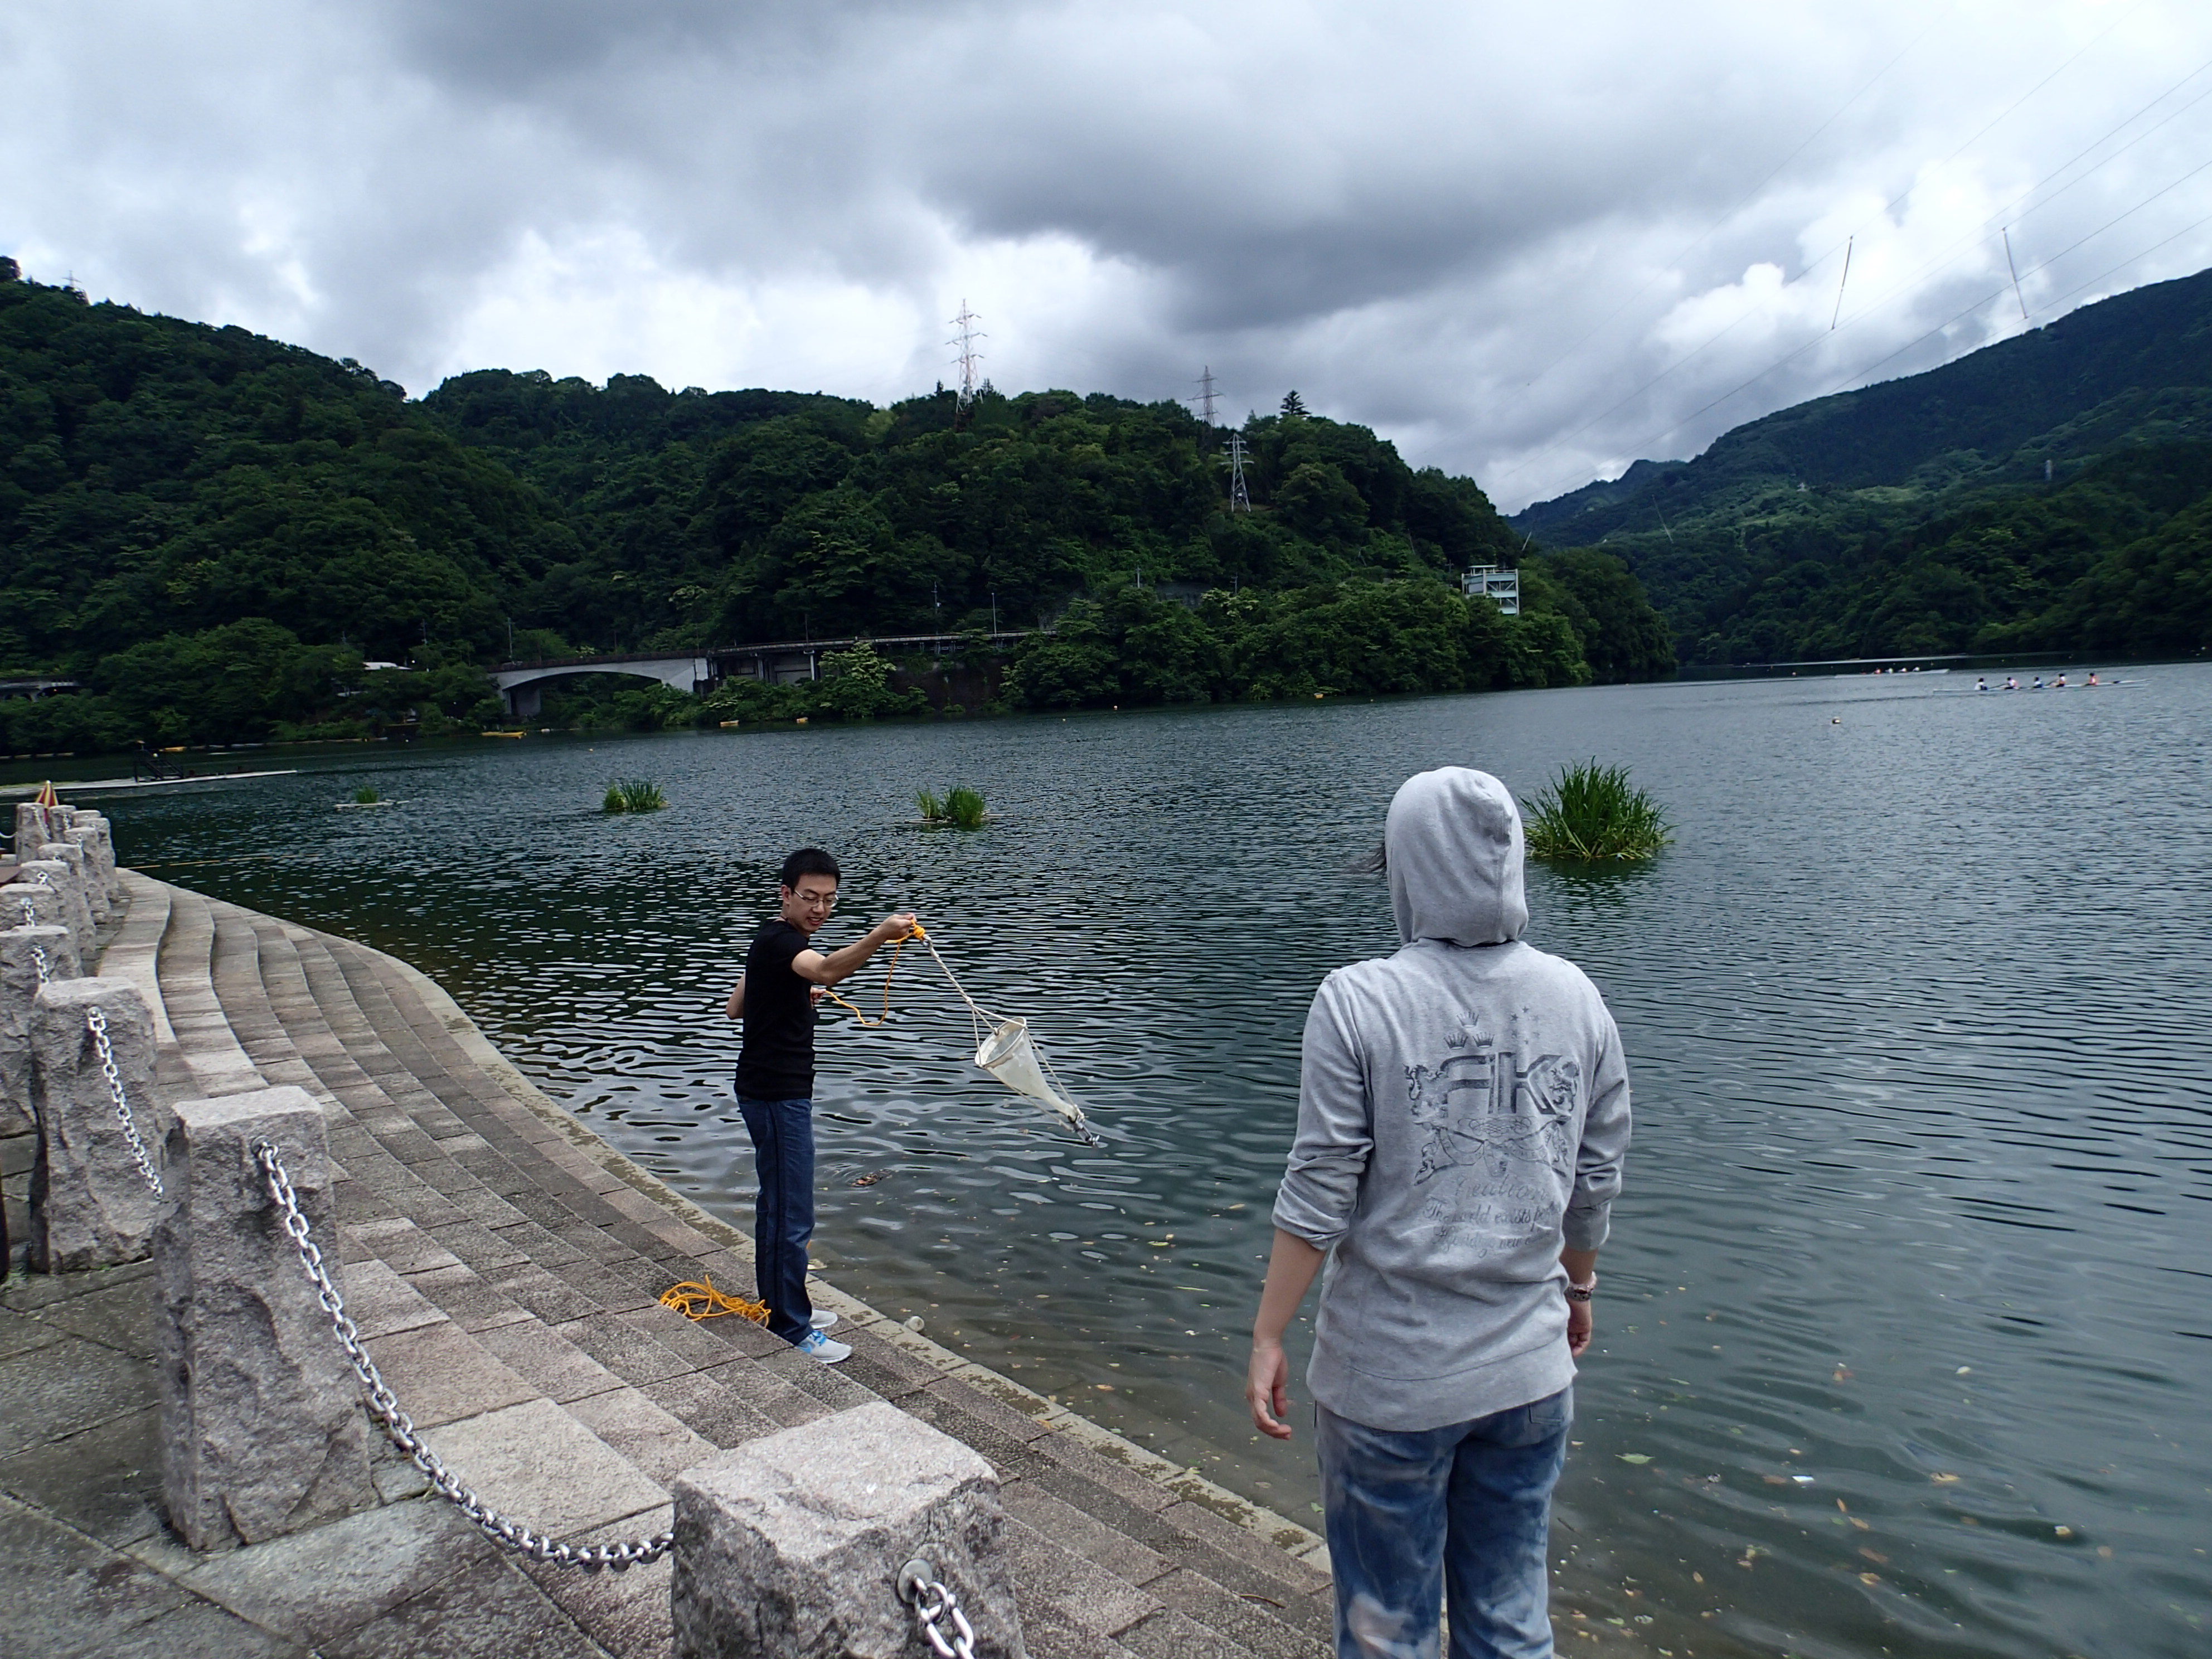 Two young men in casual clothes standing on cement steps at the edge of a body of water. One swings a algae collection net.